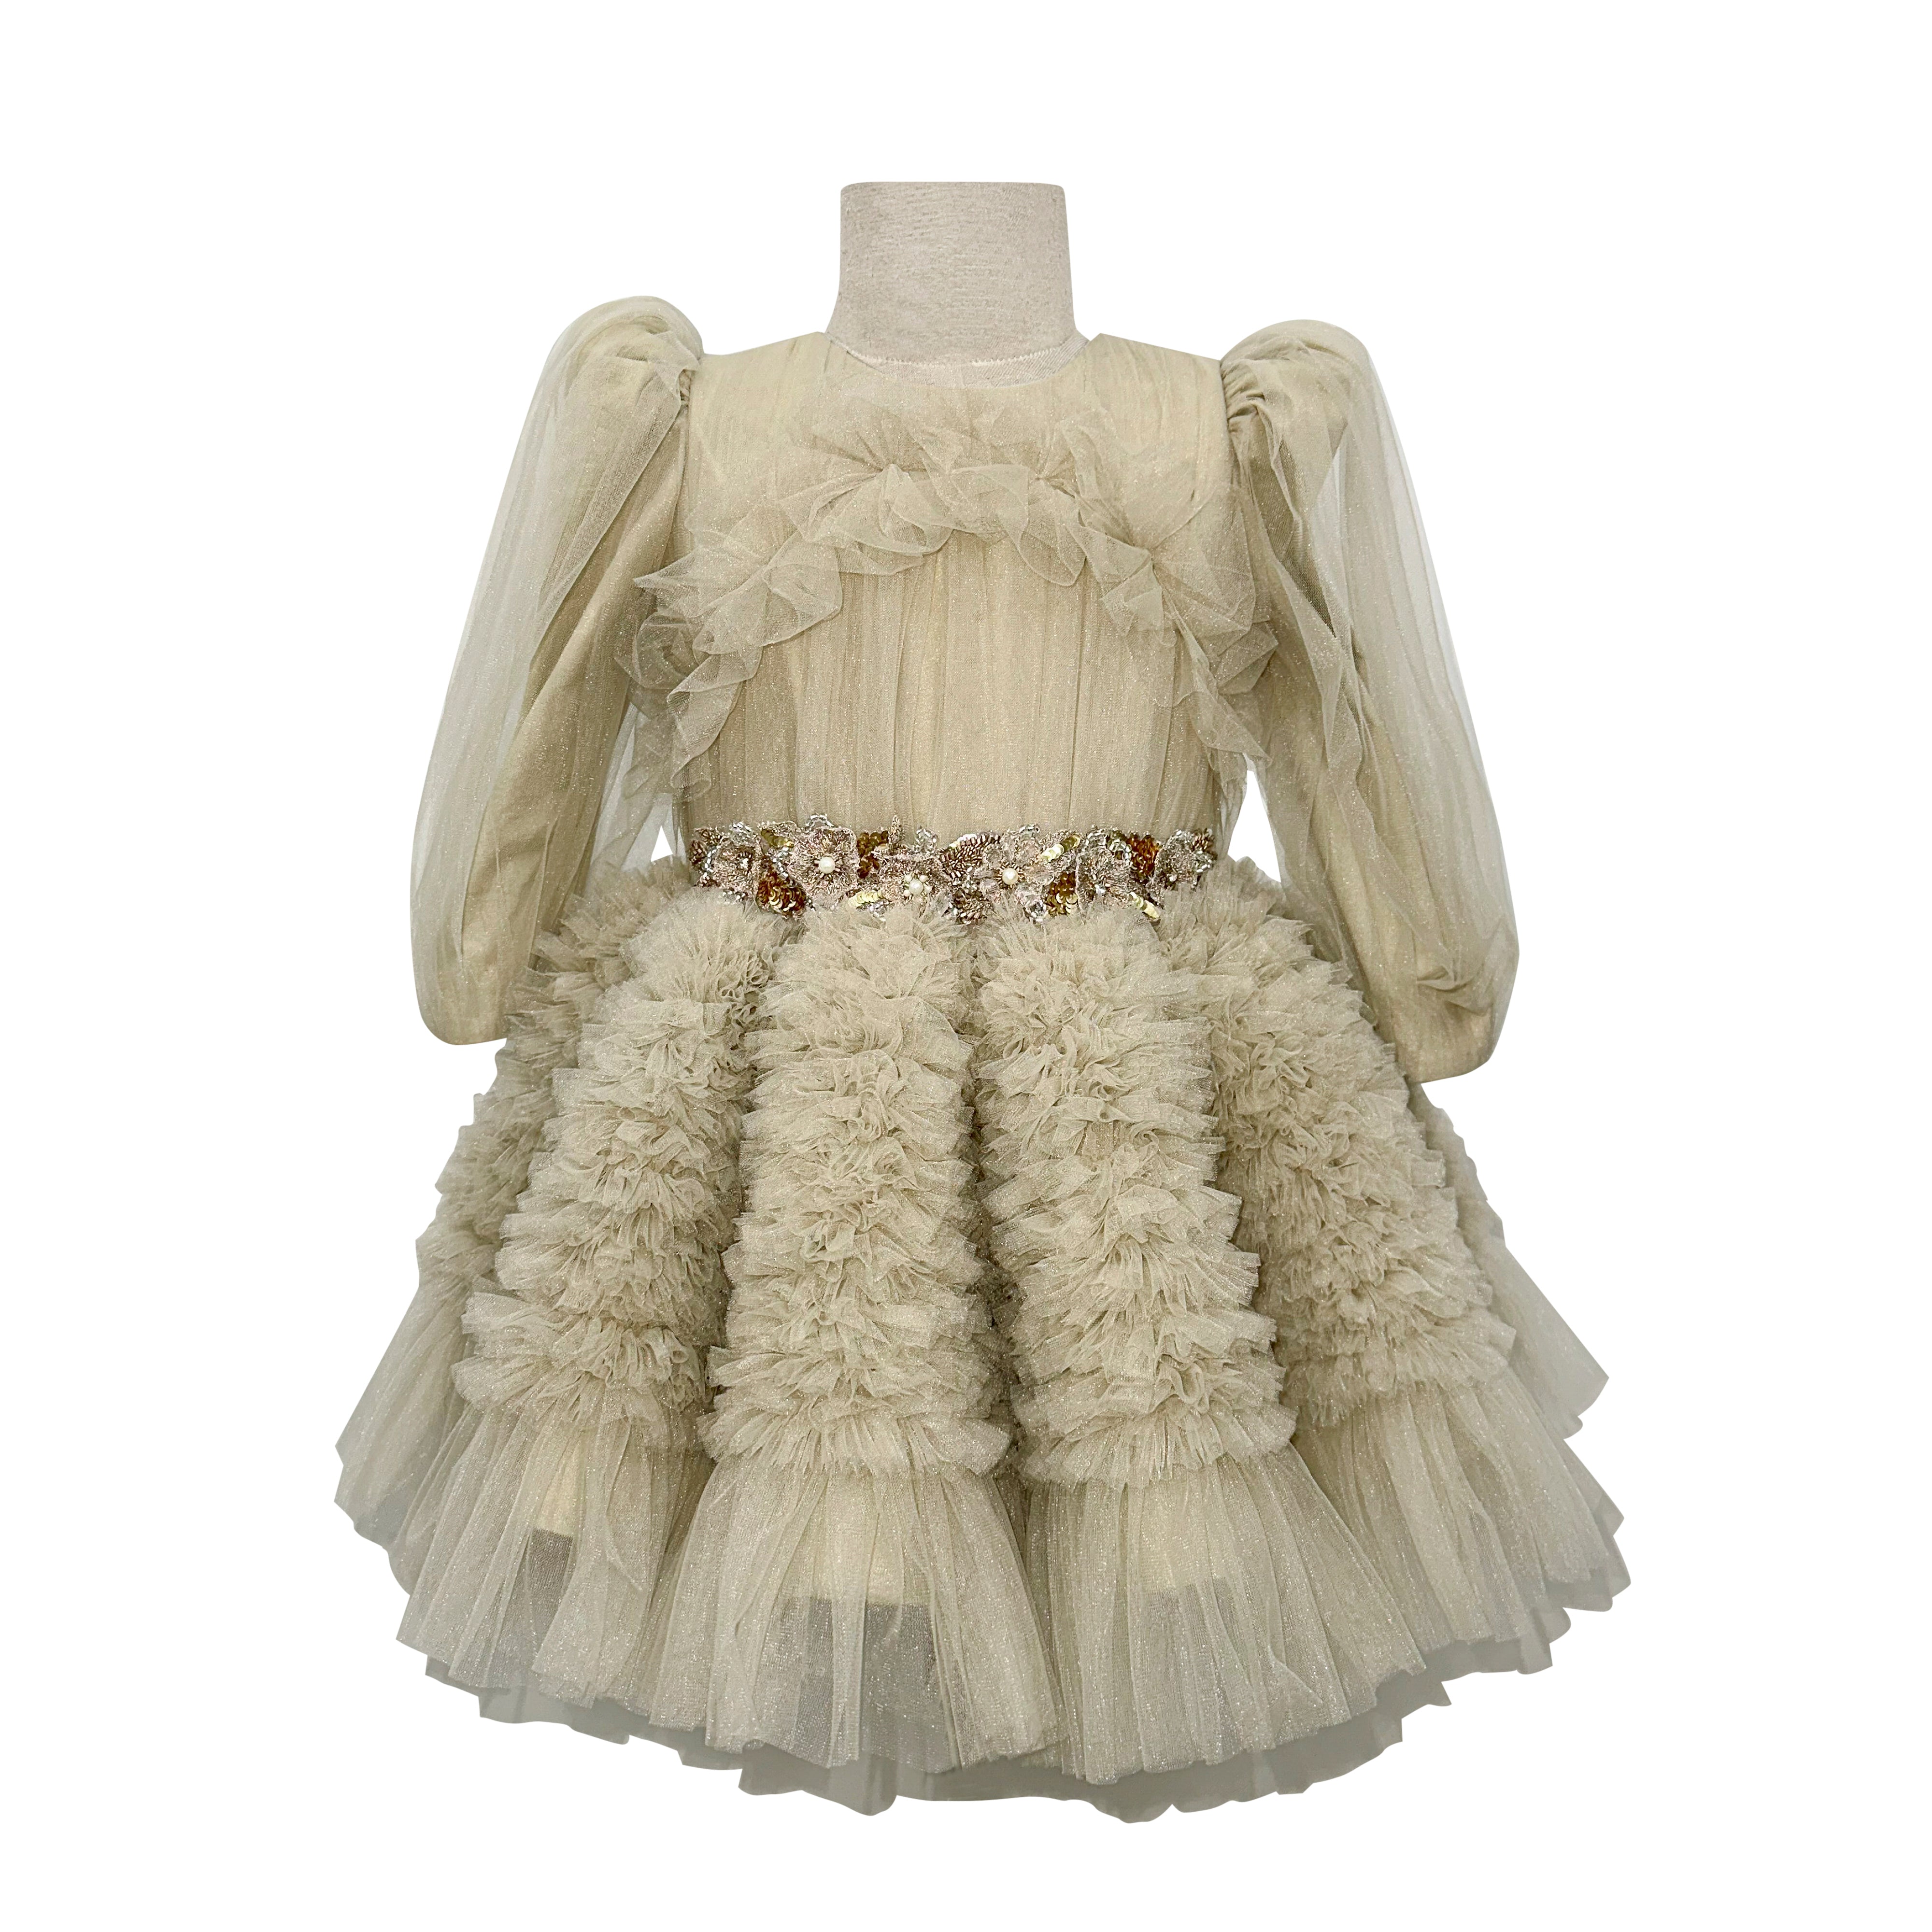 The Embellished Ariel Tulle Dress in Full Sleeves (Beige)